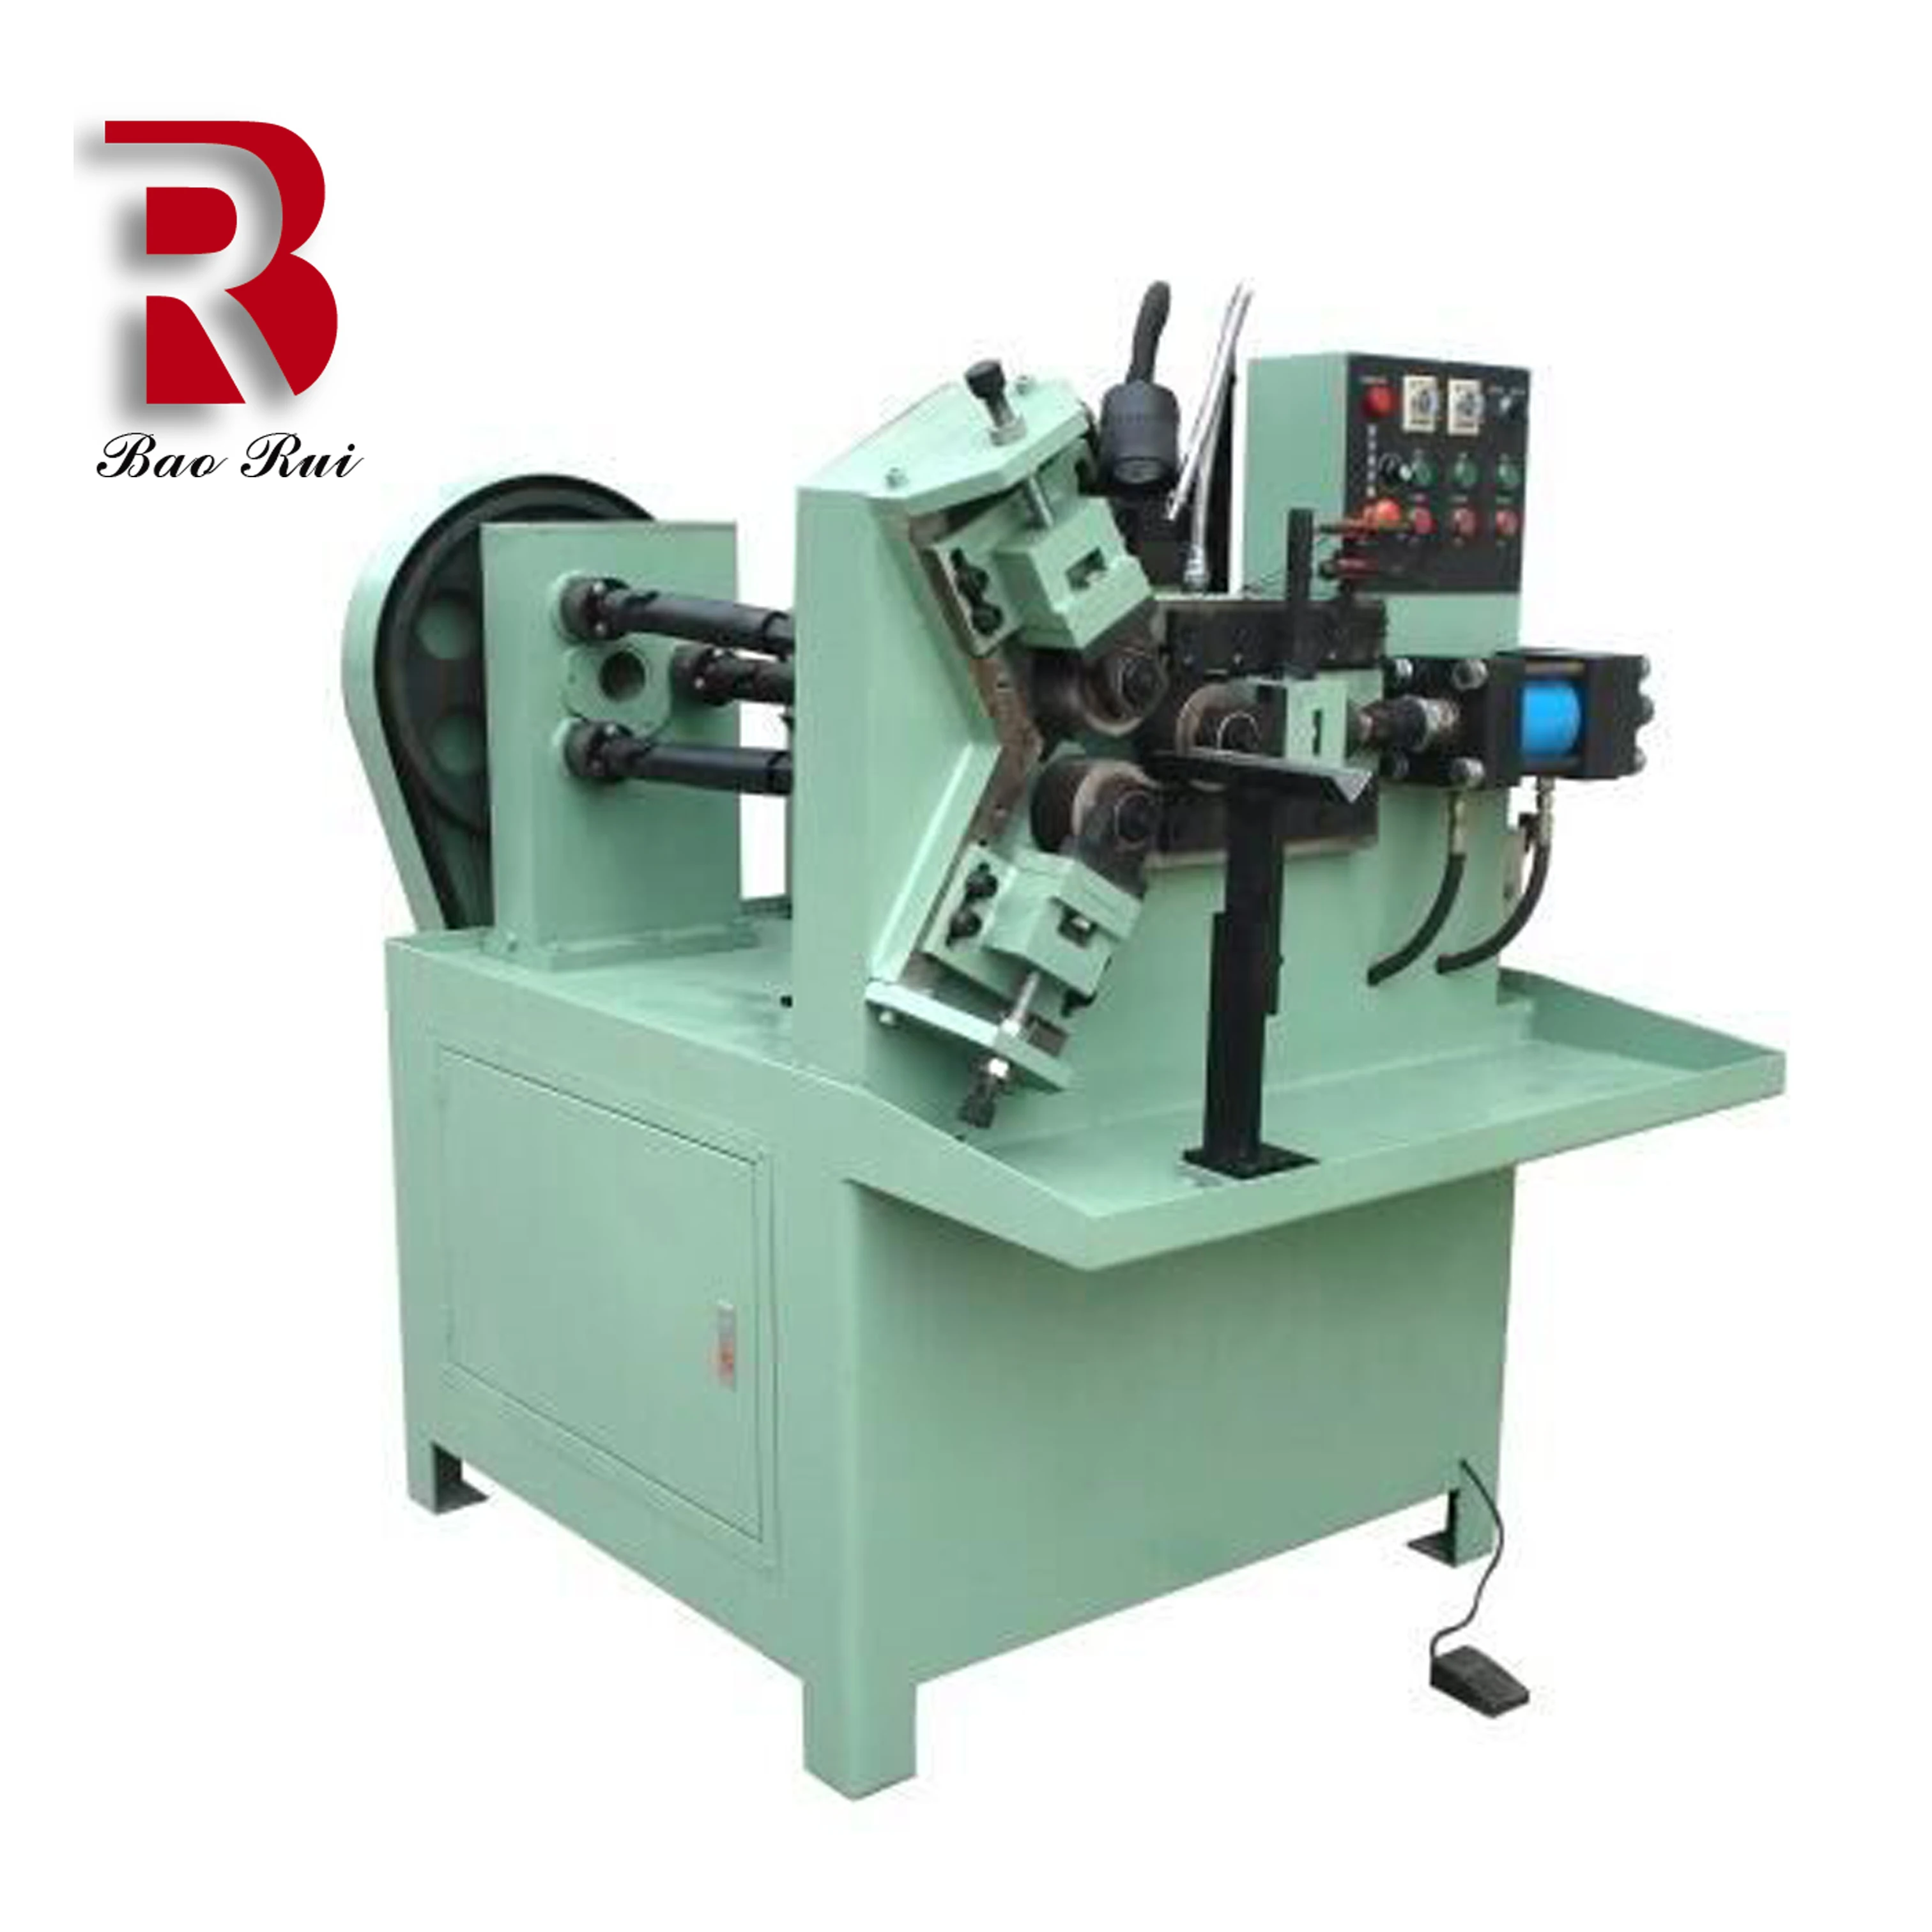 Discount on High Quality Thread Rolling Machine for Pipe and Tube with Three Rollers for stainless steel carbon steel (1600267701967)